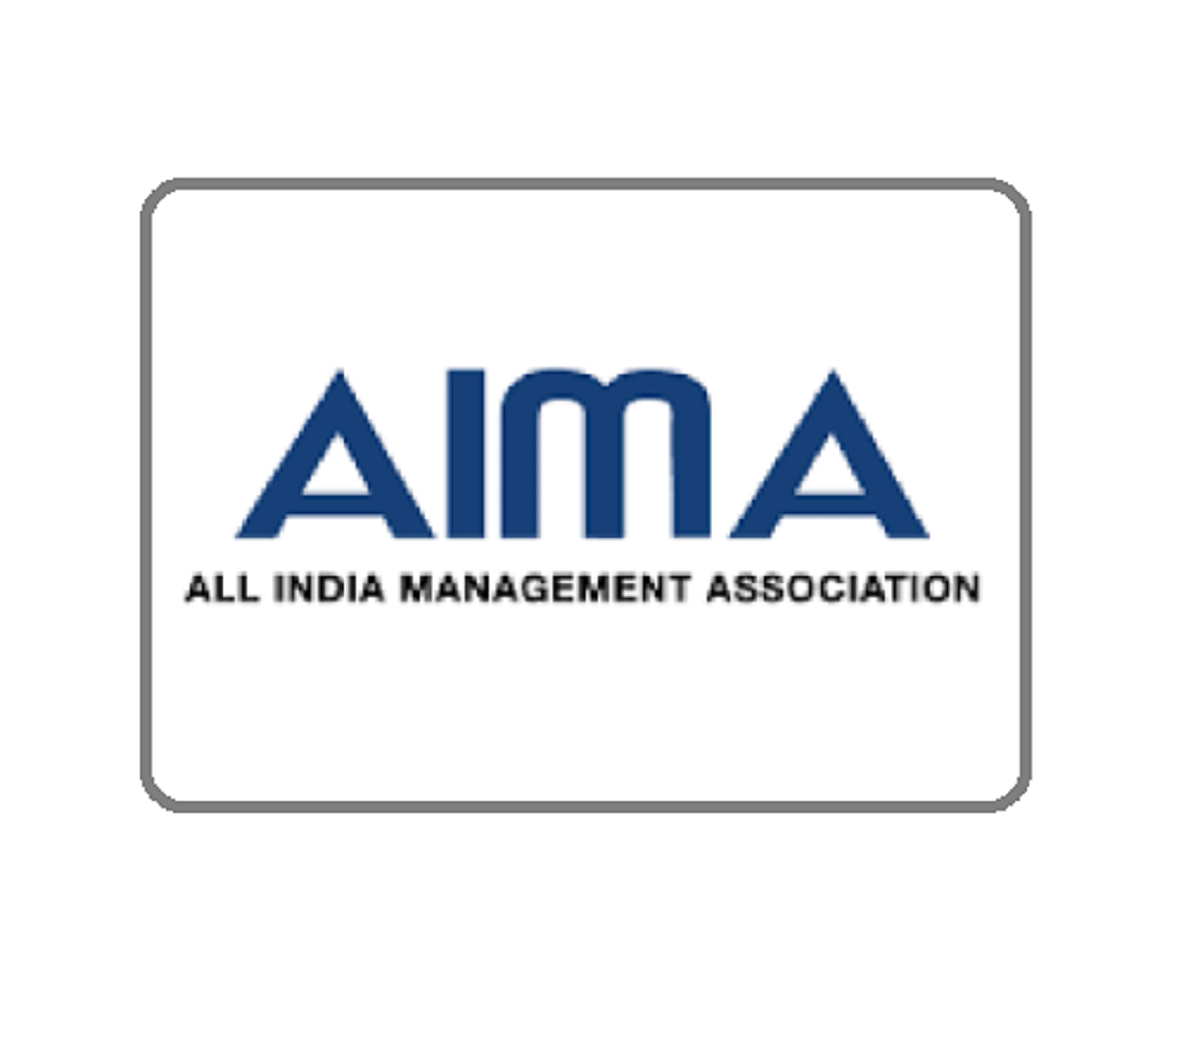 AIMA MAT 2021 Registration for CBT Exam to Close Today, Details Here